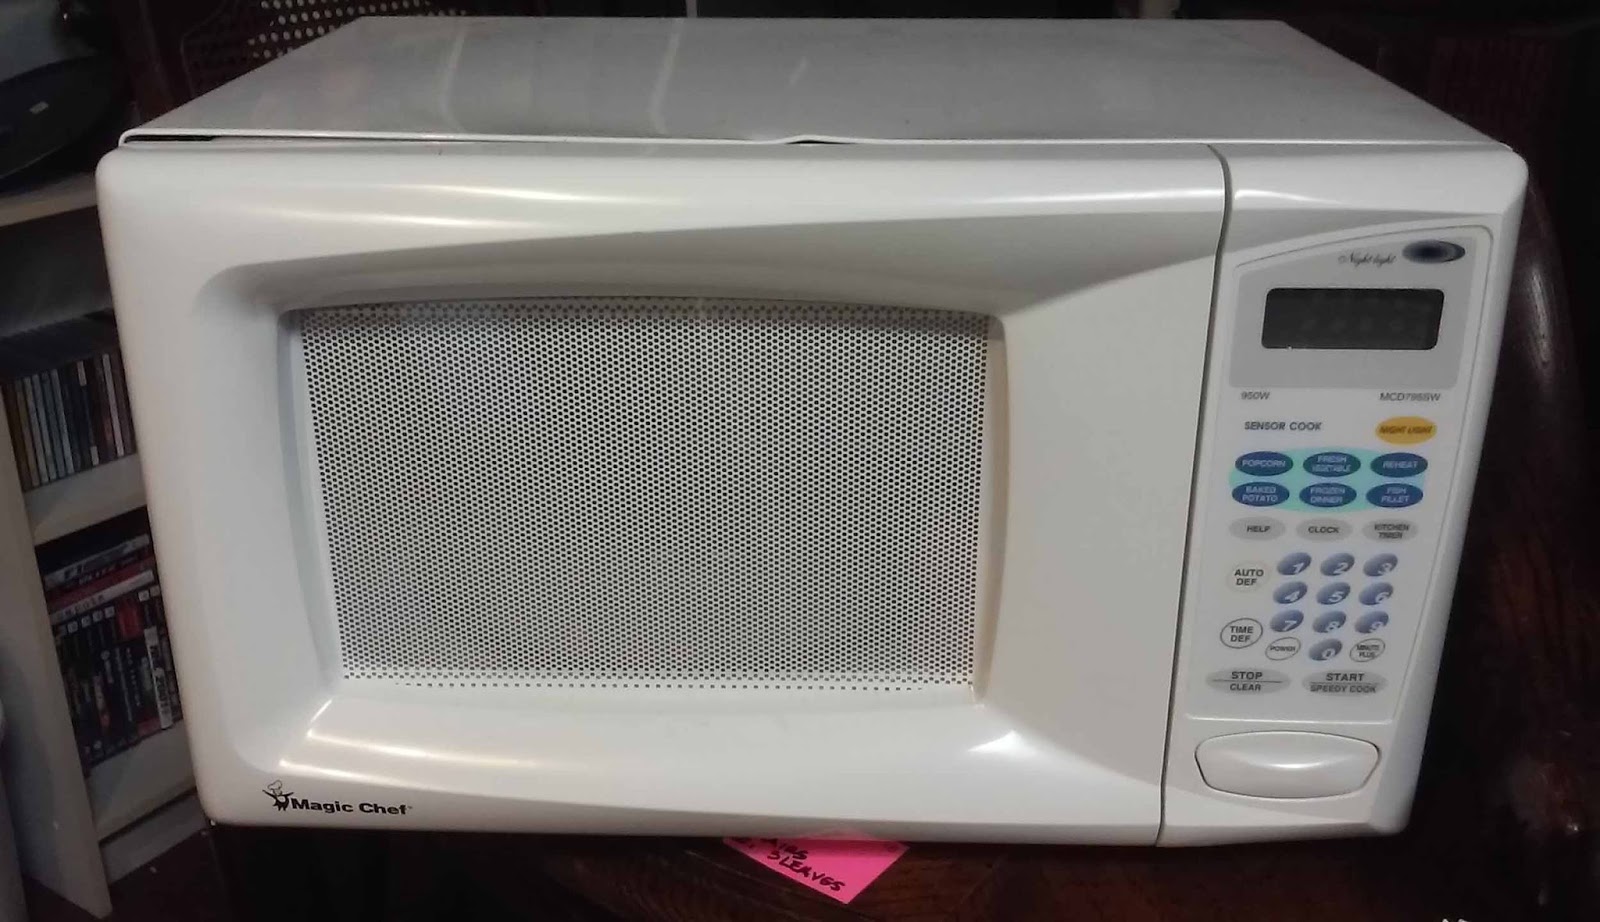 UHURU FURNITURE & COLLECTIBLES: SOLD Magic Chef Microwave - $10 / as is